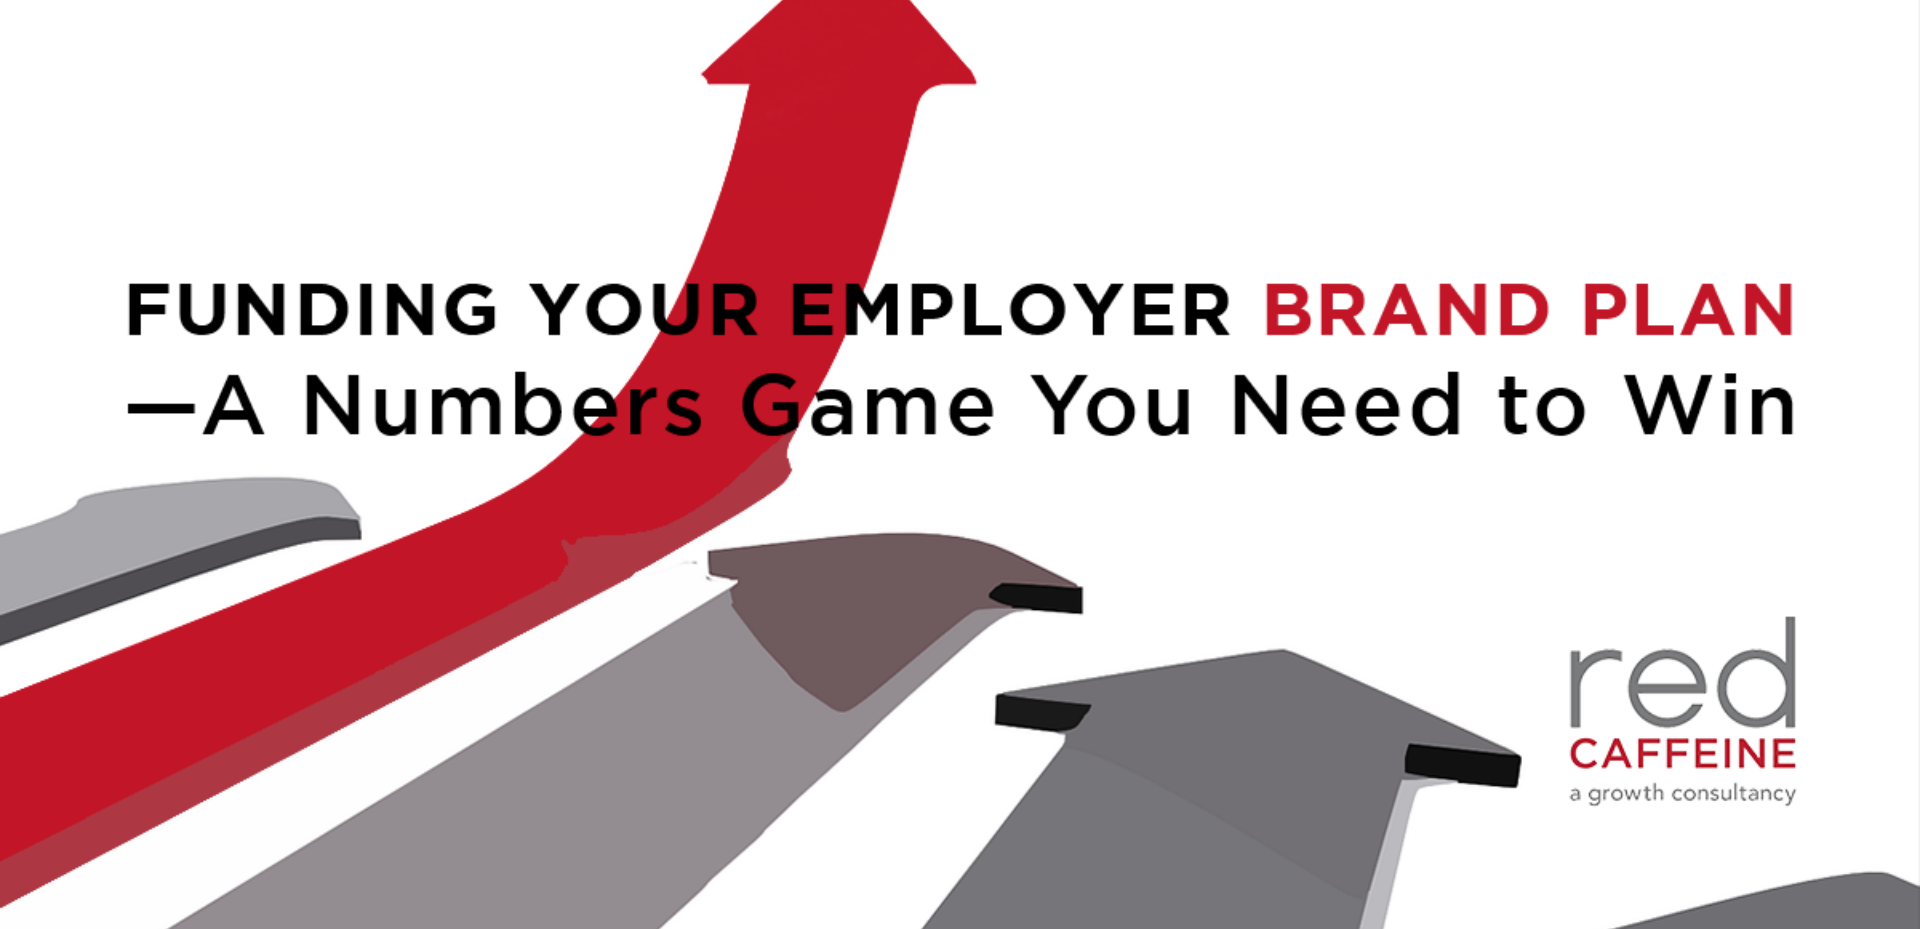 Funding Your Employer Brand Plan—A Numbers Game You Need to Win